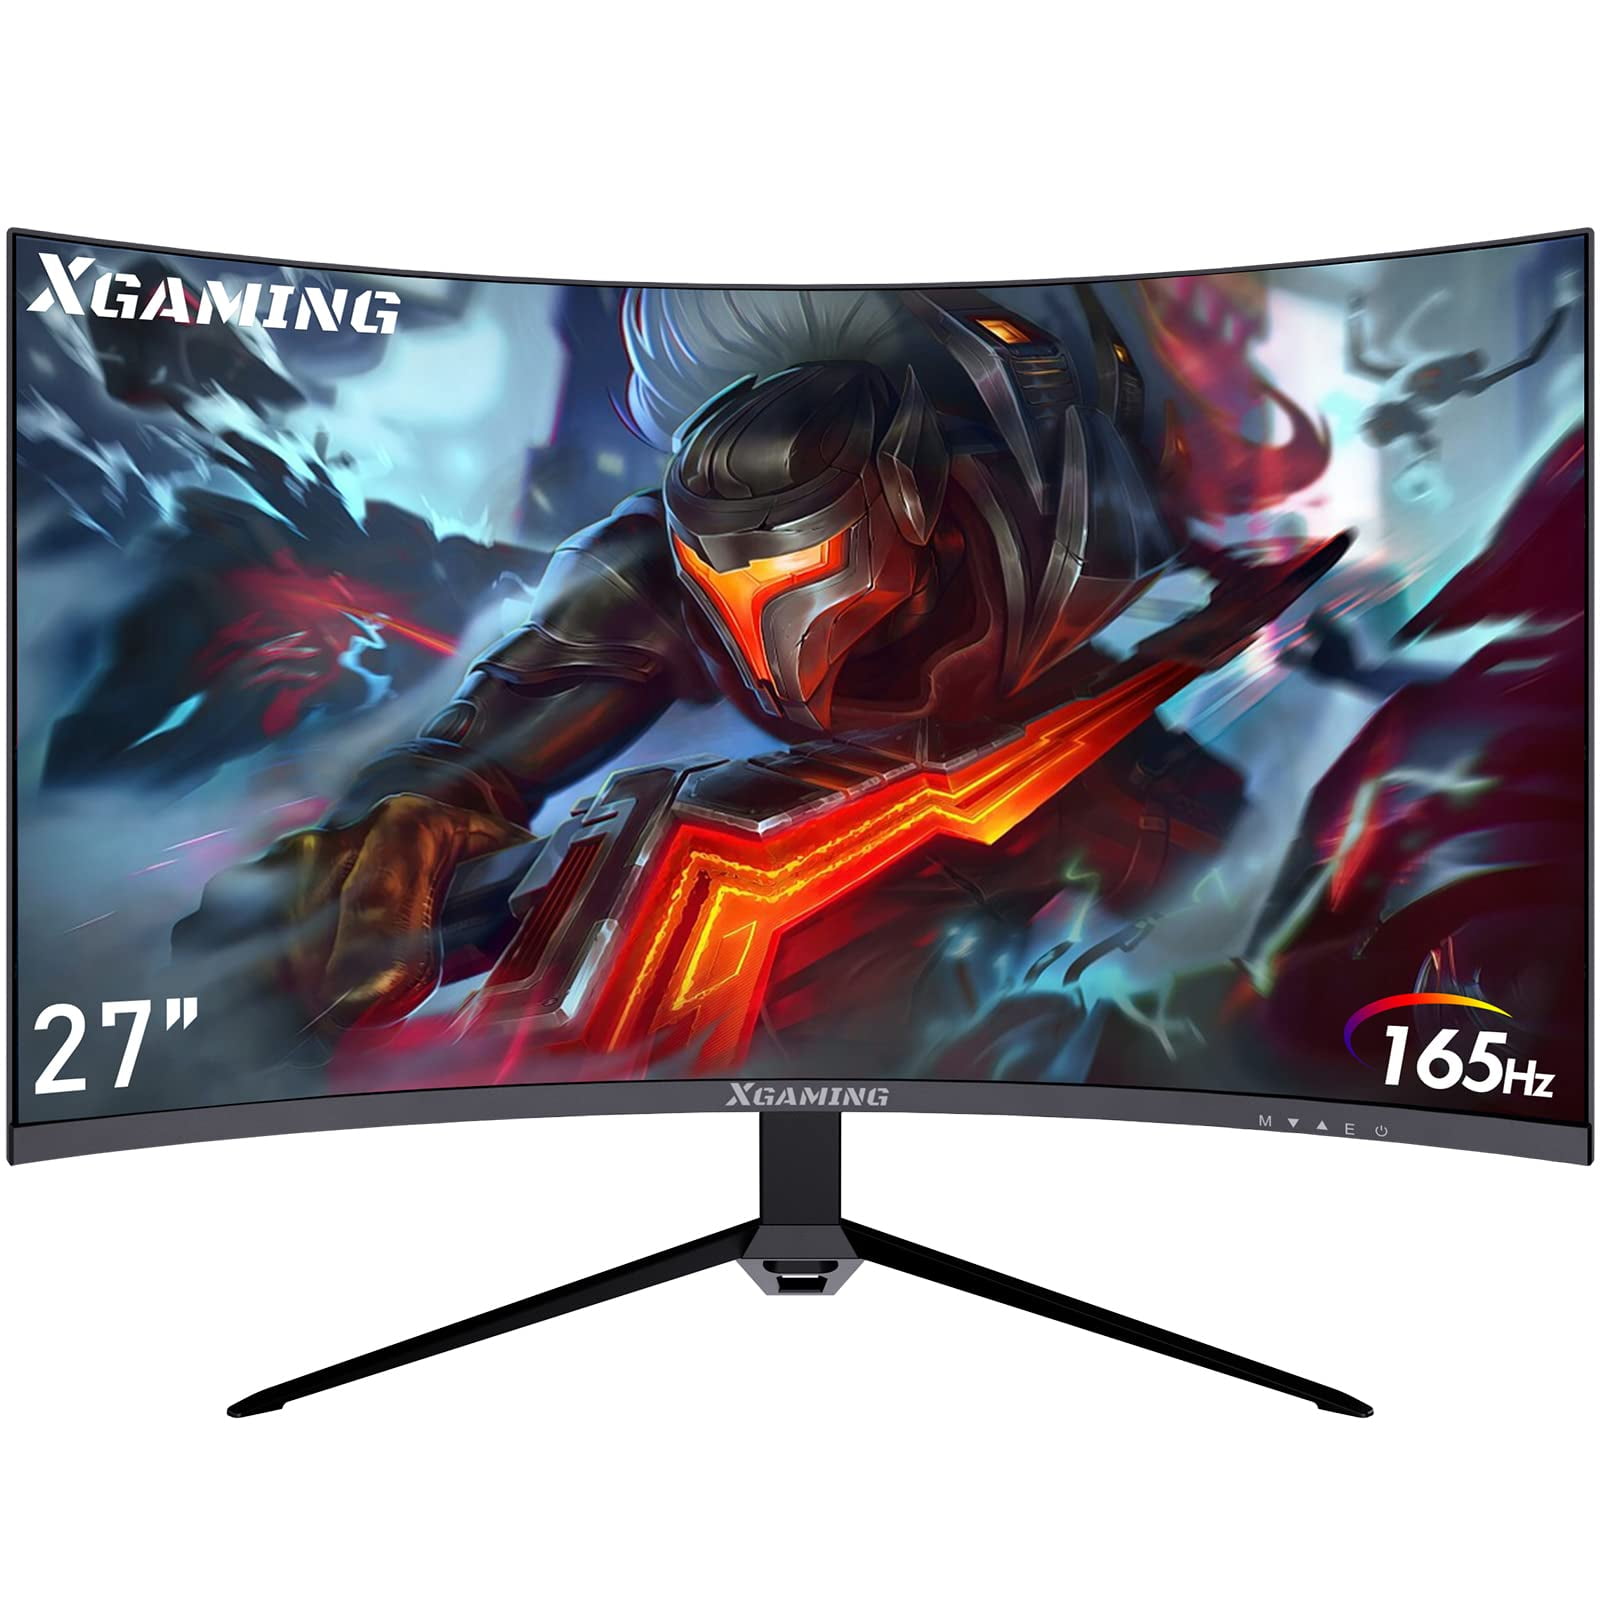 Xgaming 27-inch Gaming Monitor, Ultra Wide 16:9 PC Monitor with 165Hz Refresh Rate, QHD 2560 x 1440 Display, DisplayPort, HDMI Speakers, Black - Walmart.com